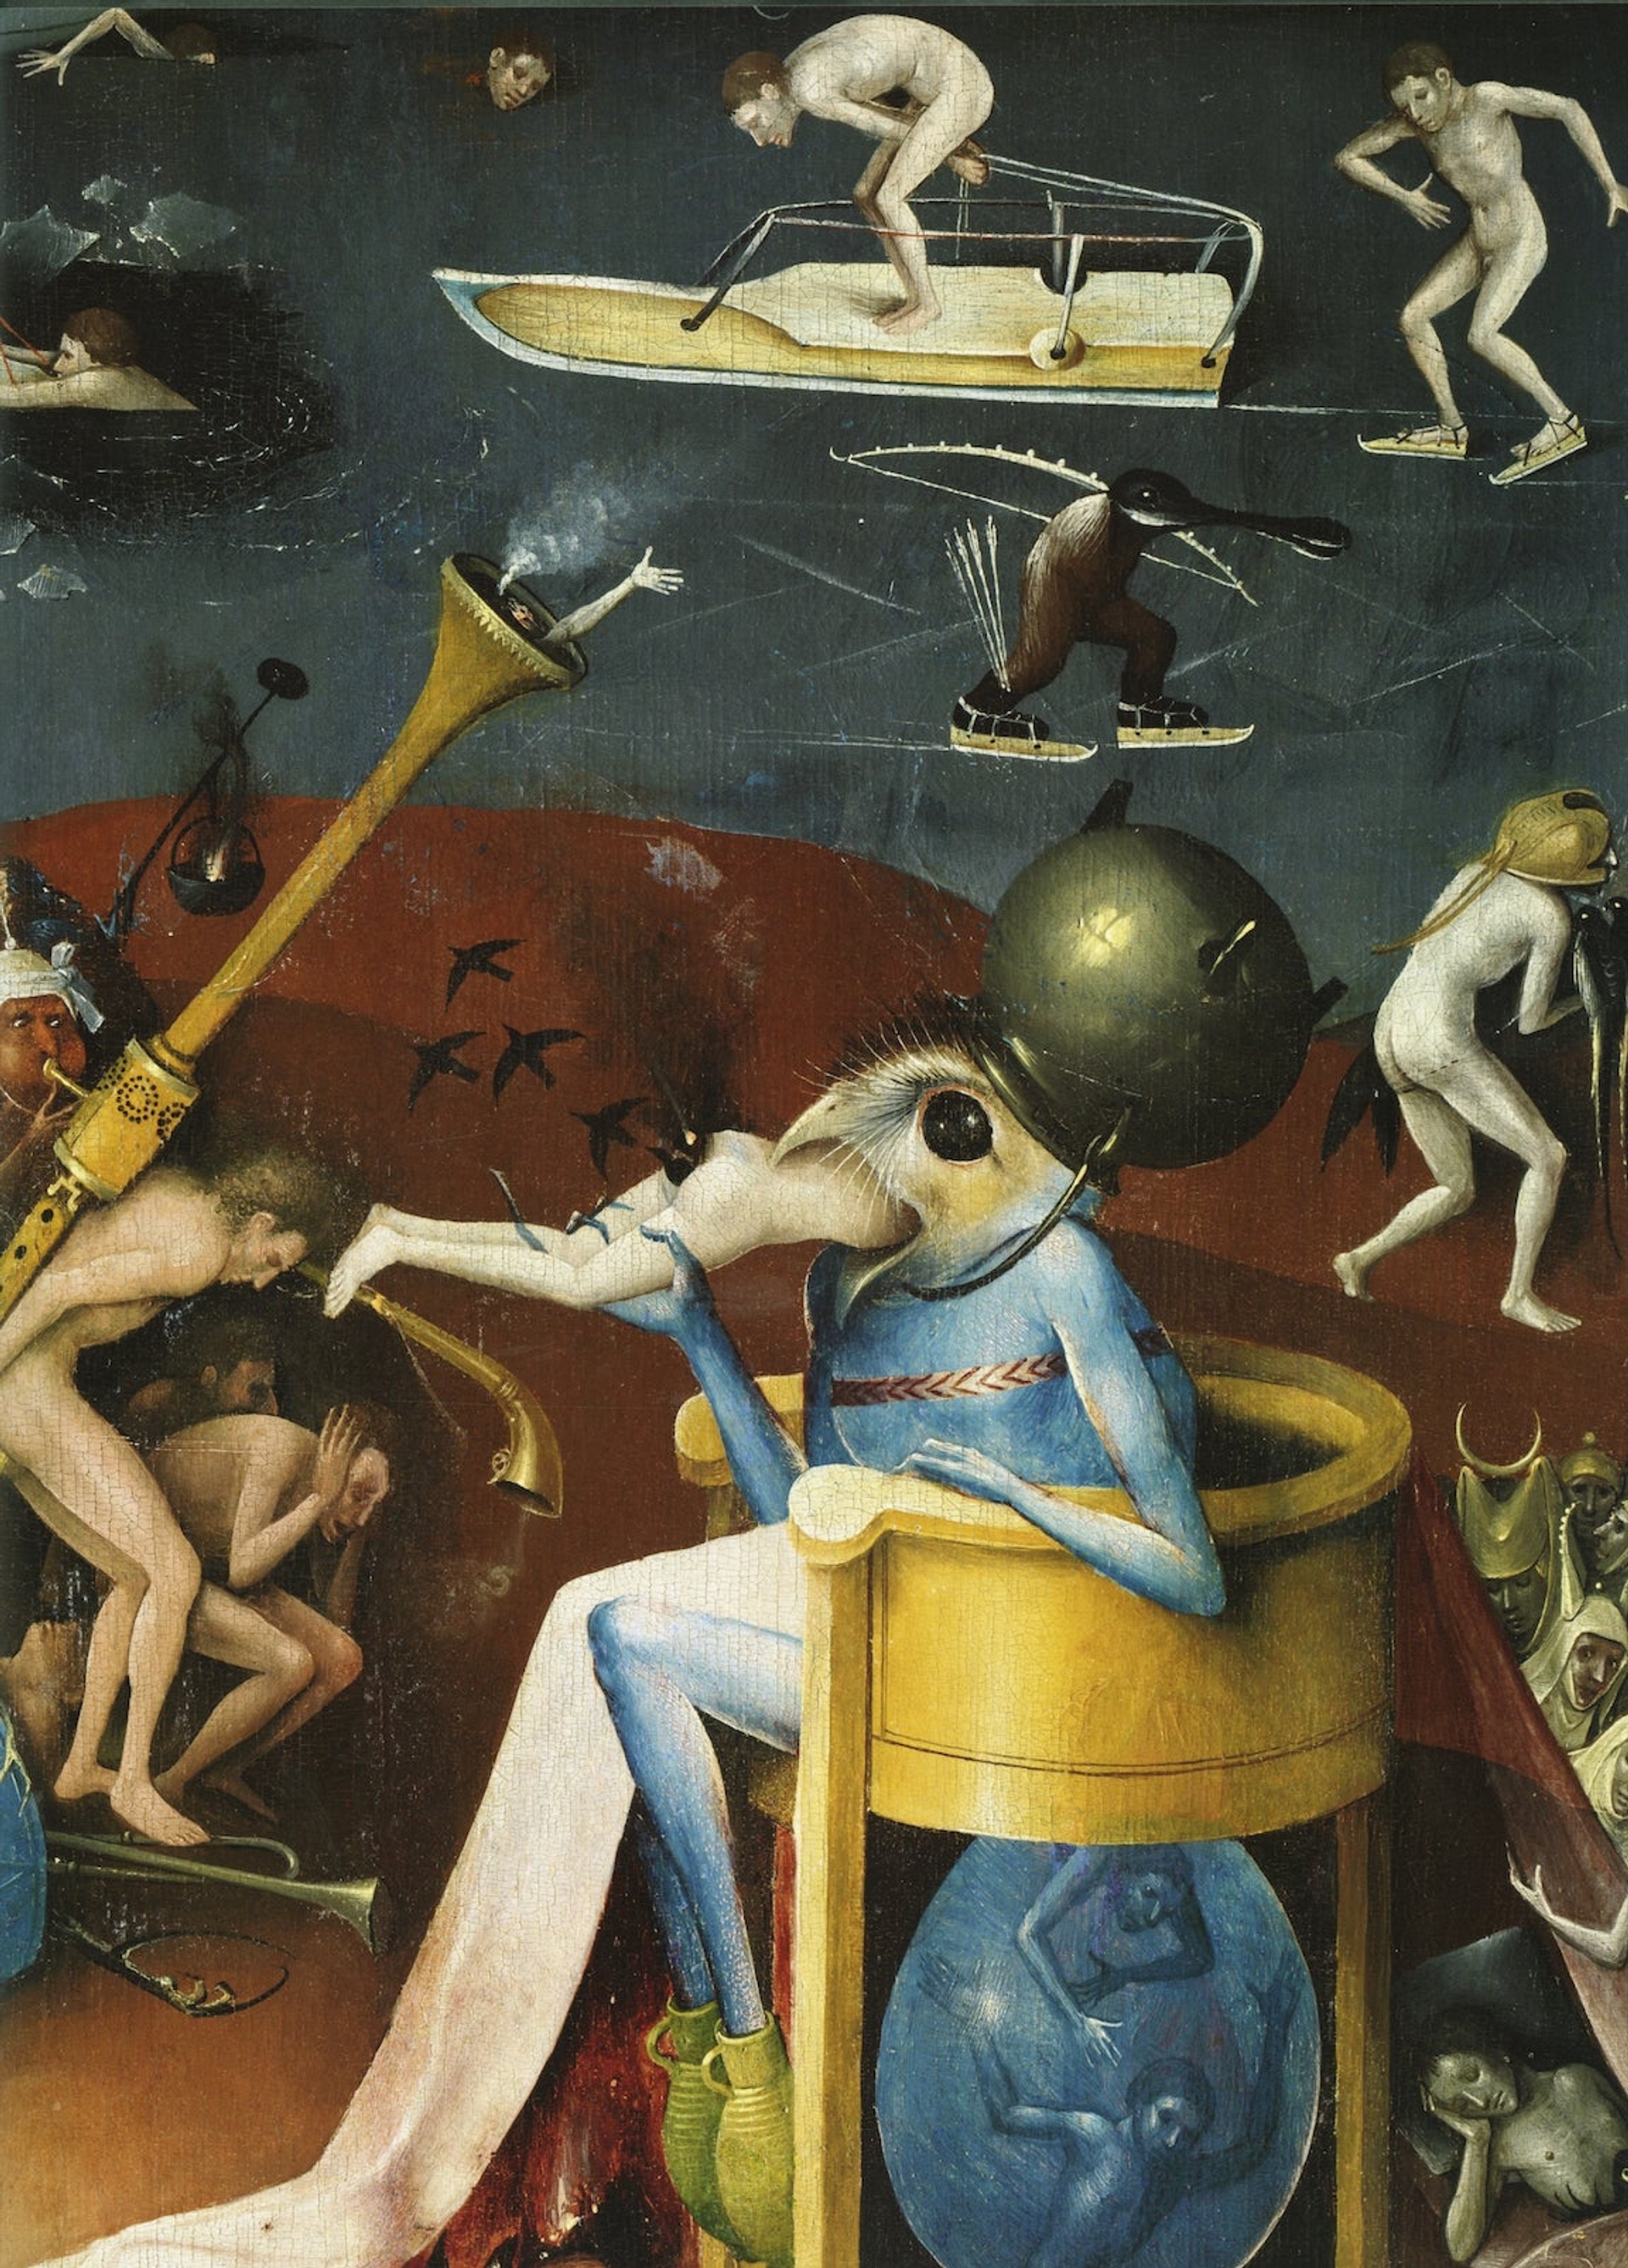 Hieronymus Bosch, The Garden of Earthly Delights (detail), 1503